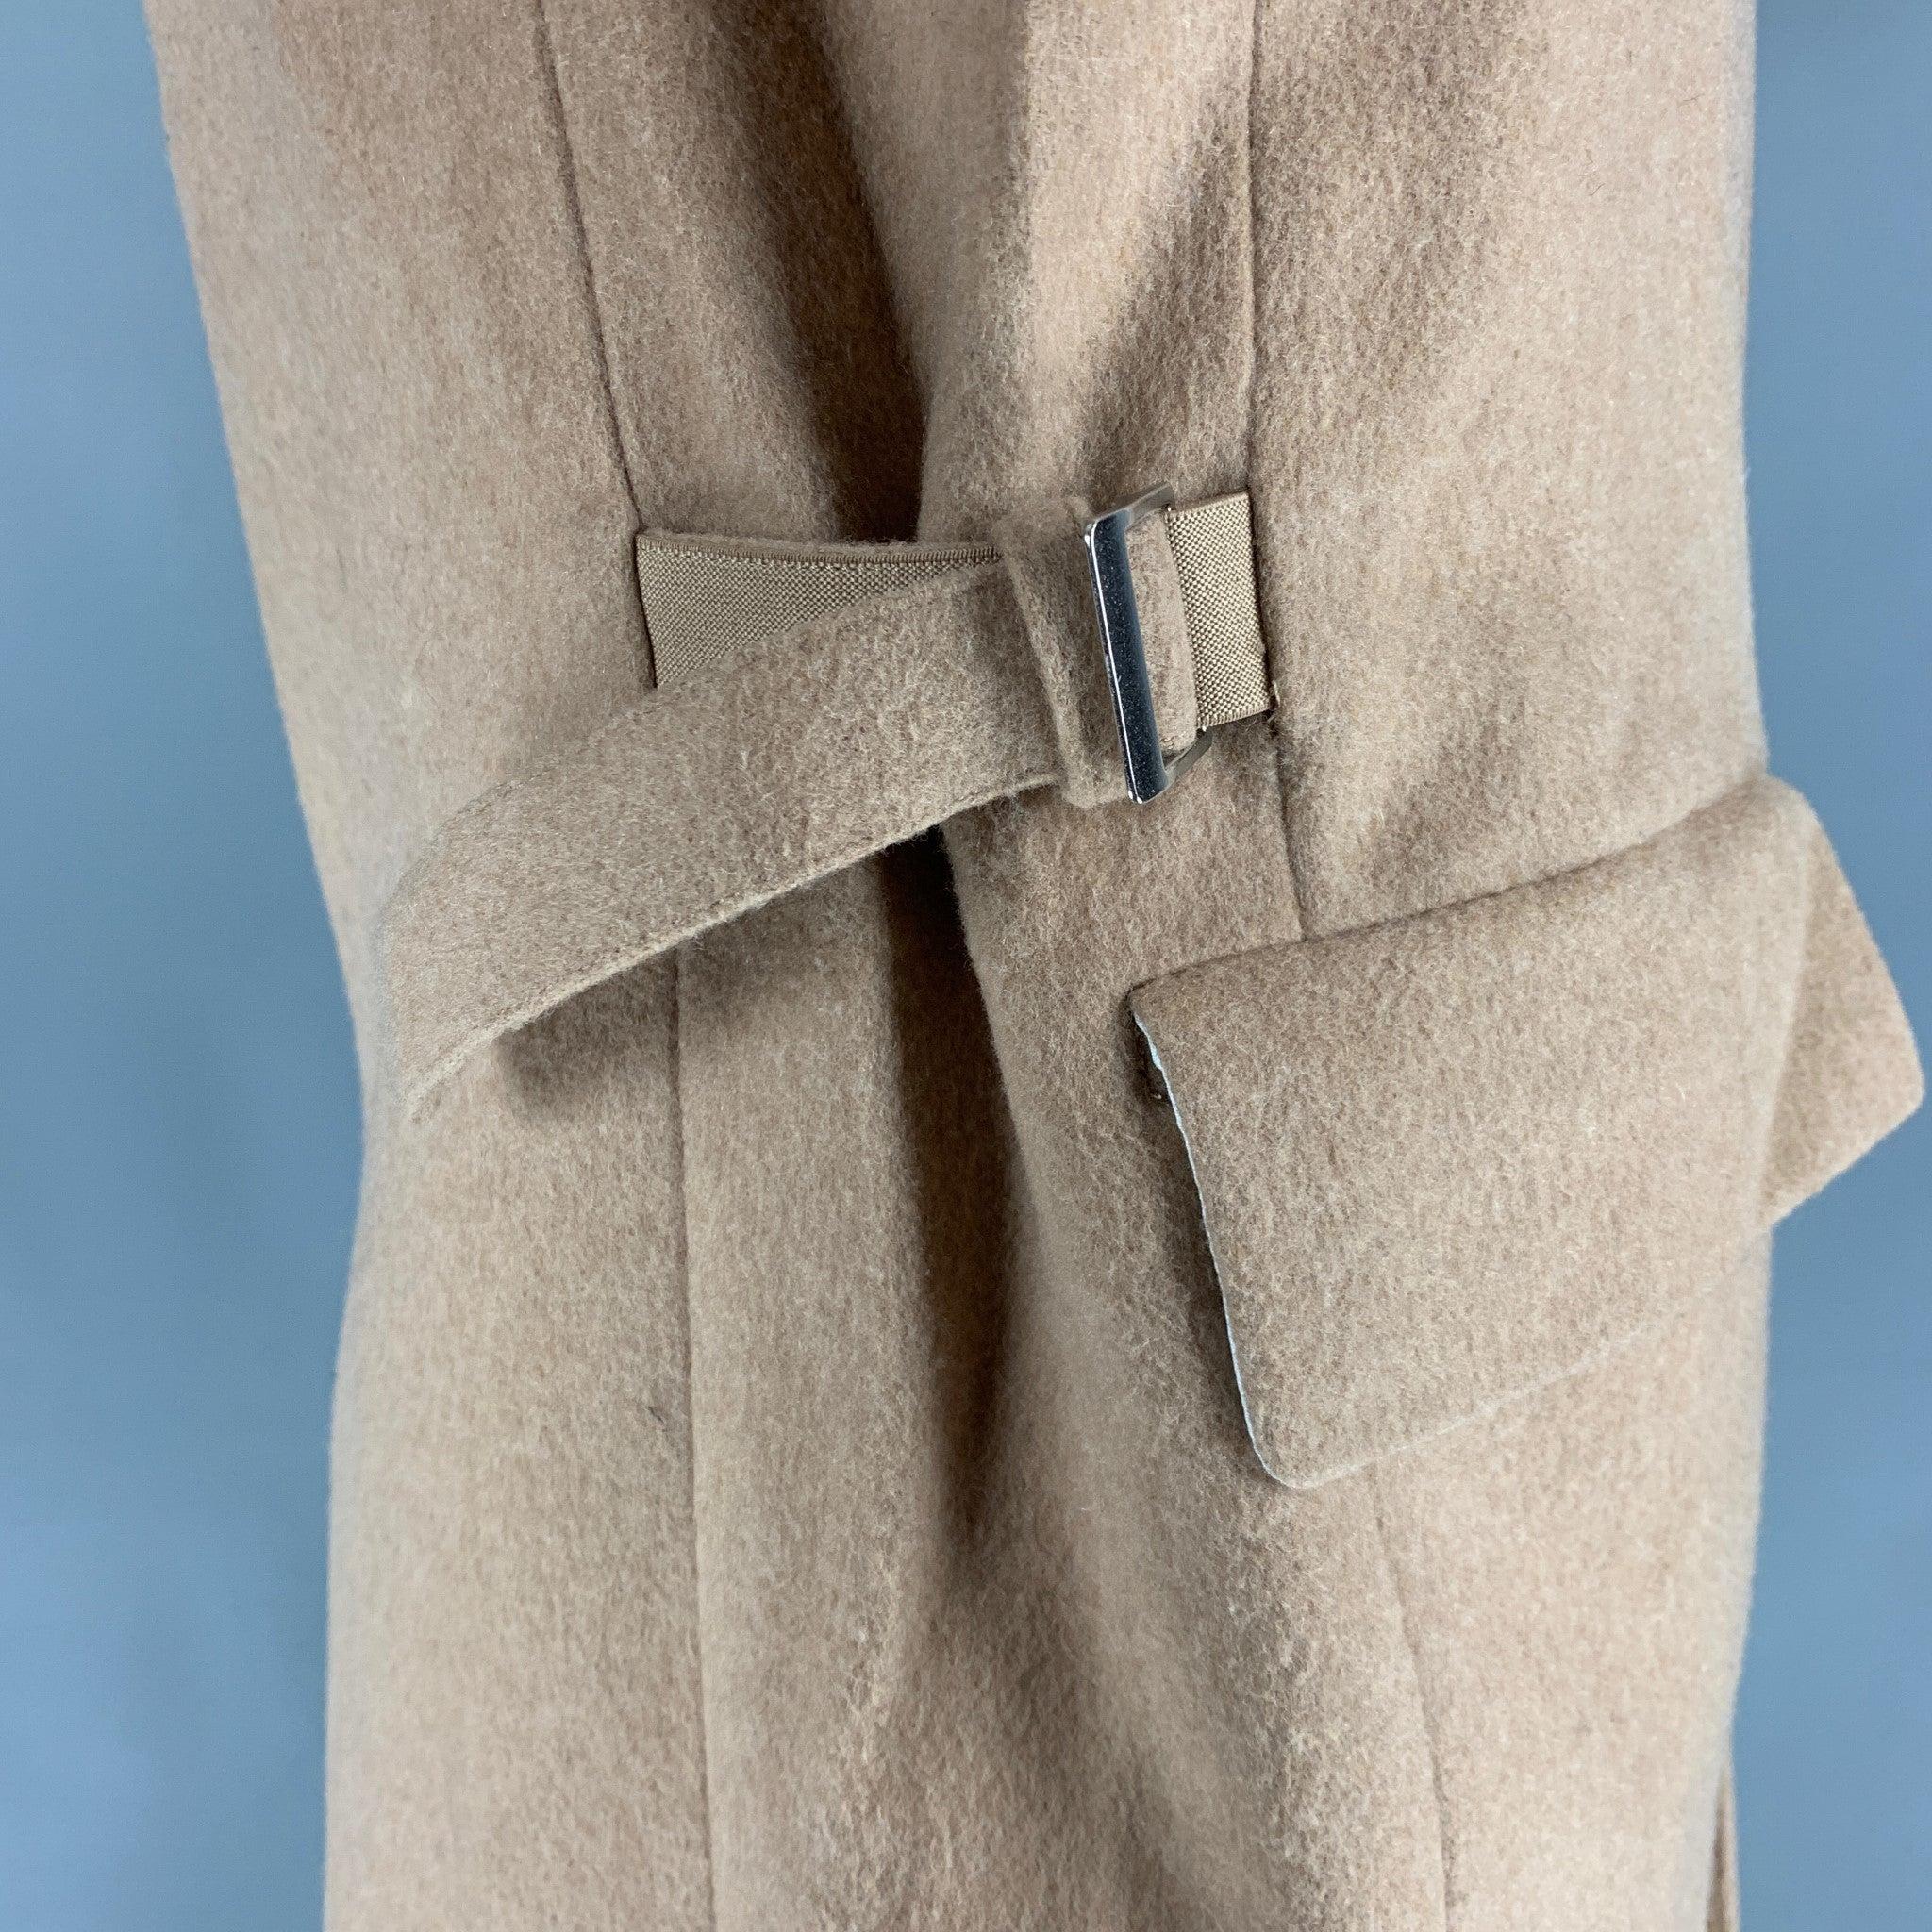 HELMUT LANG coat comes in a beige wool & cashmere blend, featuring a notch lapel, and flap pockets and adjustable tabs around the waist.Excellent Pre-Owned Condition. 

Marked:  42 

Measurements: 
 
Shoulder: 19 inches Chest: 42 inches Sleeve: 27